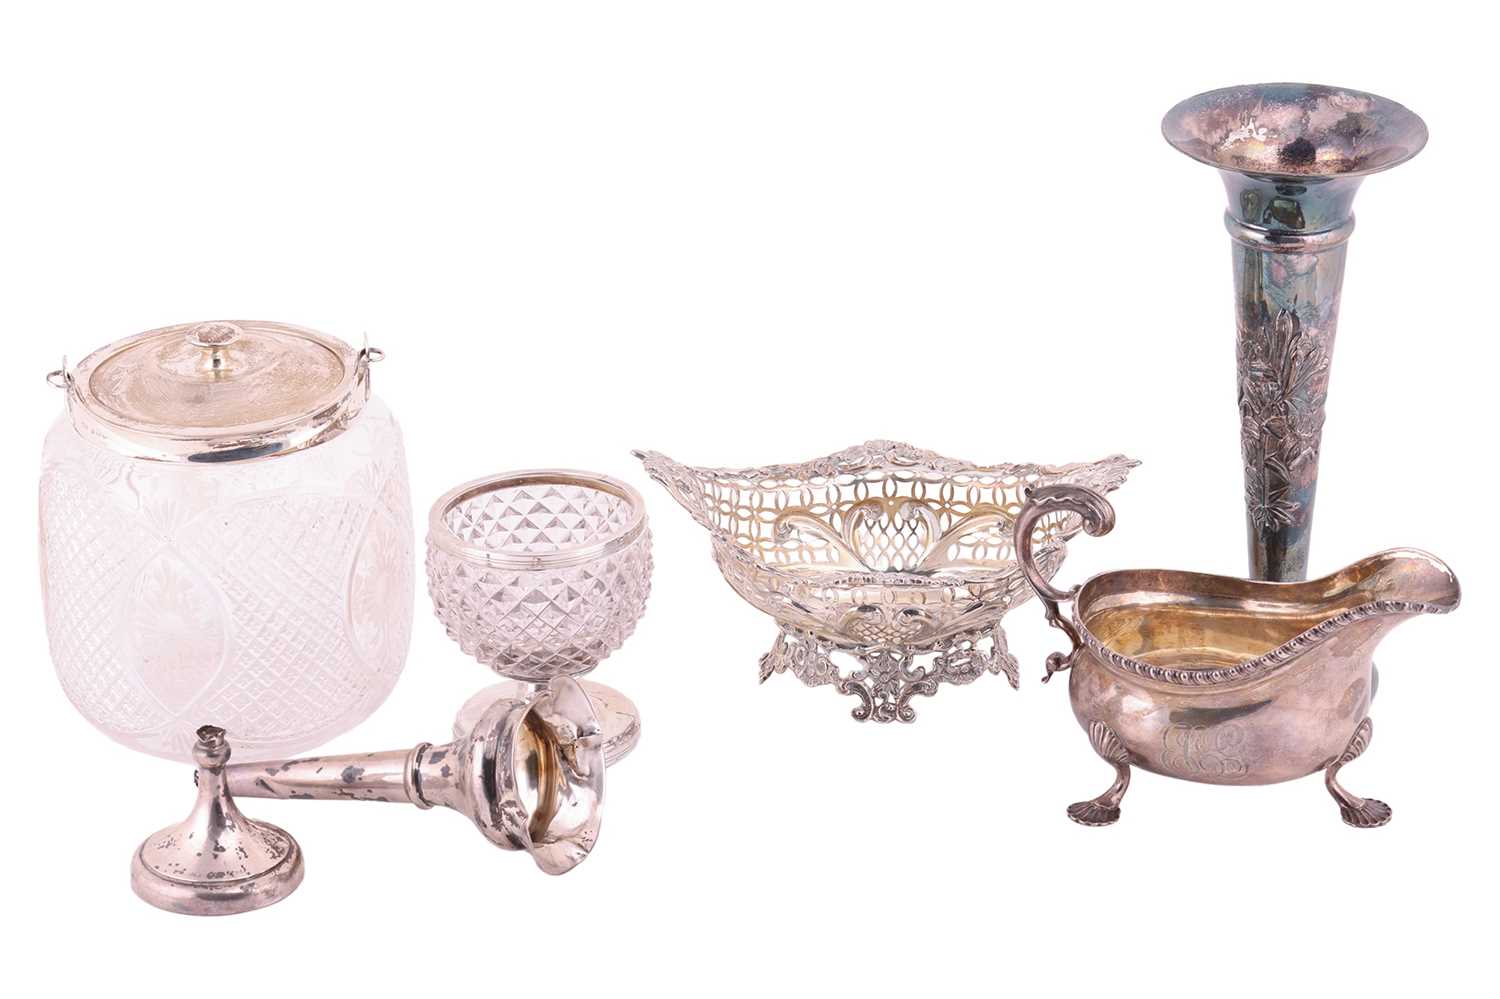 A pierced silver boat form Bonbon Dish, London 1894 by William Comyns, together with a silver mounte